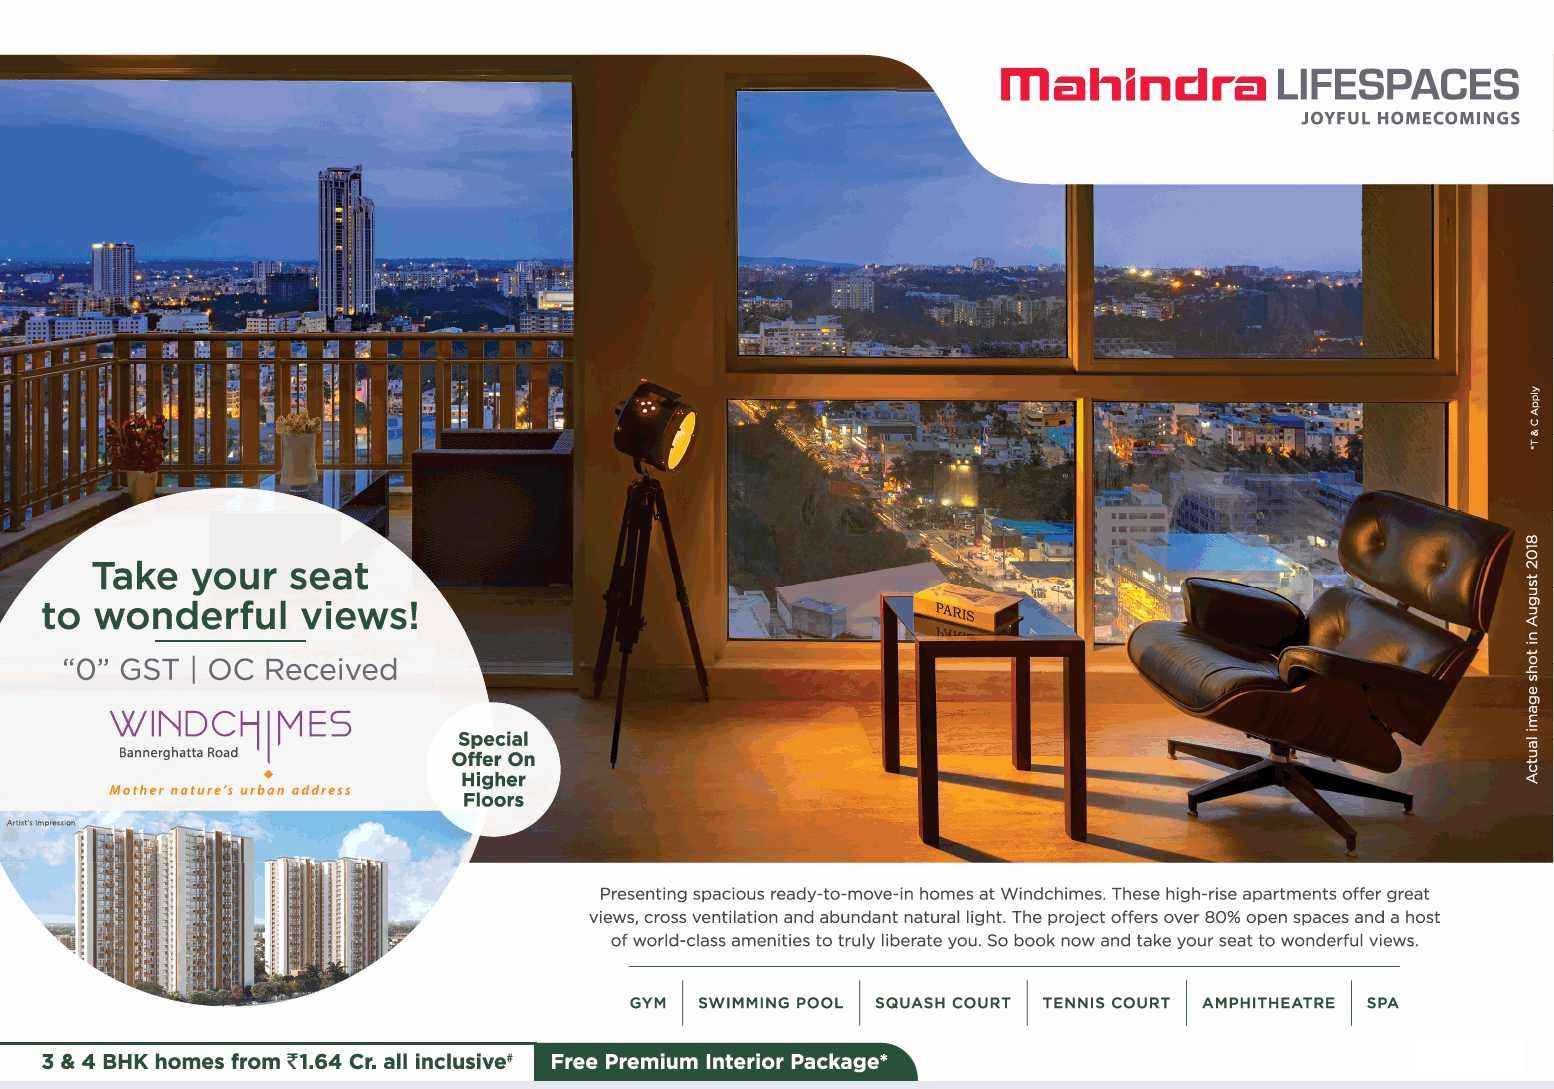 Presenting spacious ready to move in homes at Mahindra Windchimes in Bangalore Update